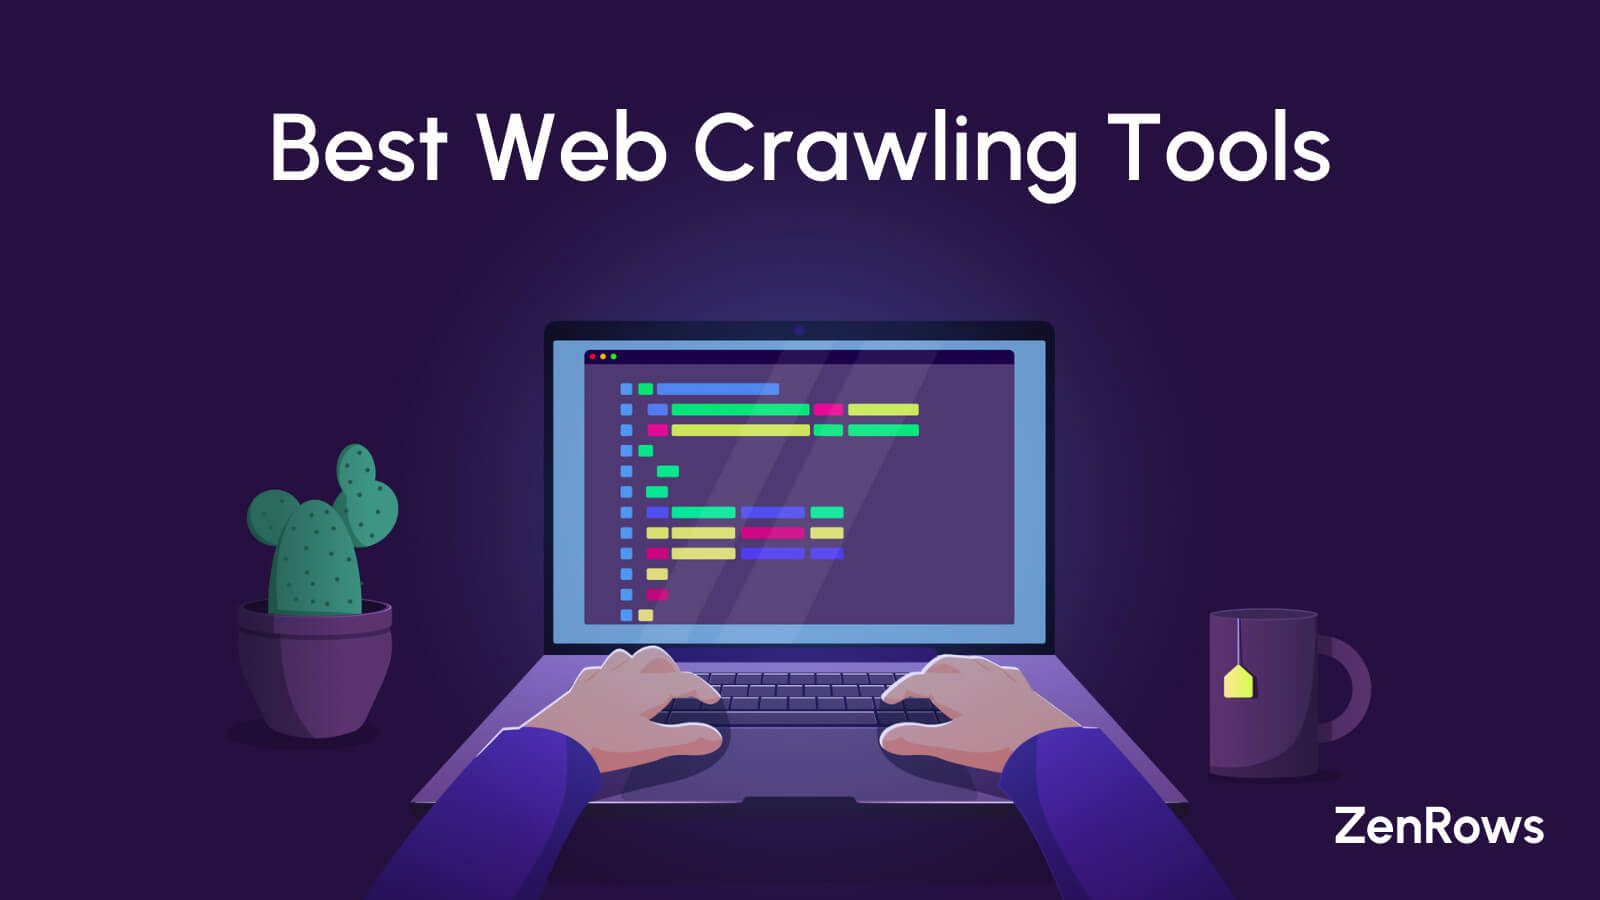 20 Best Web Crawling Tools & Software in 2023